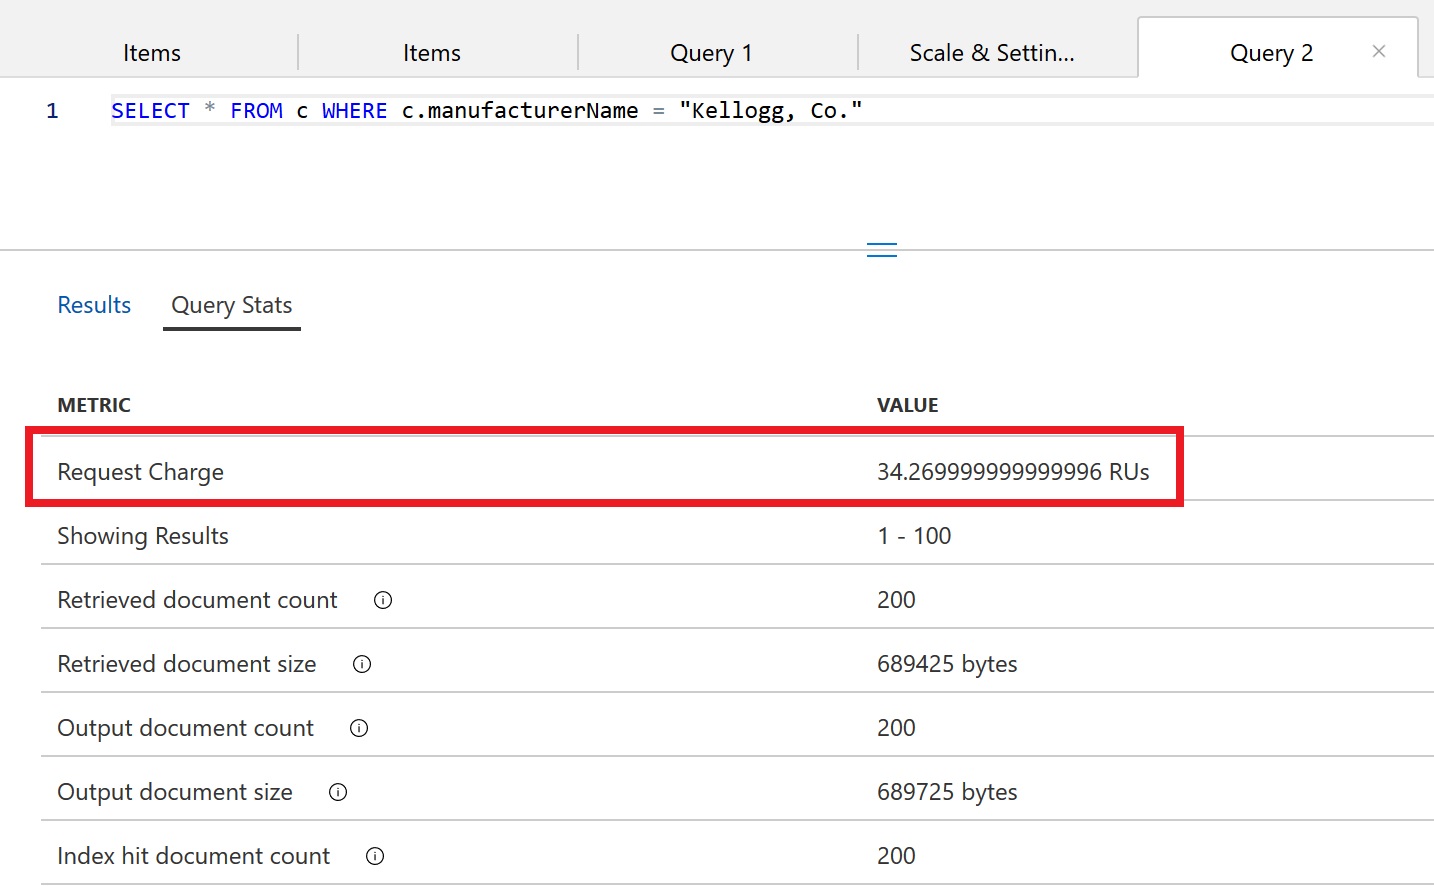 Query metrics are displayed for the previous query